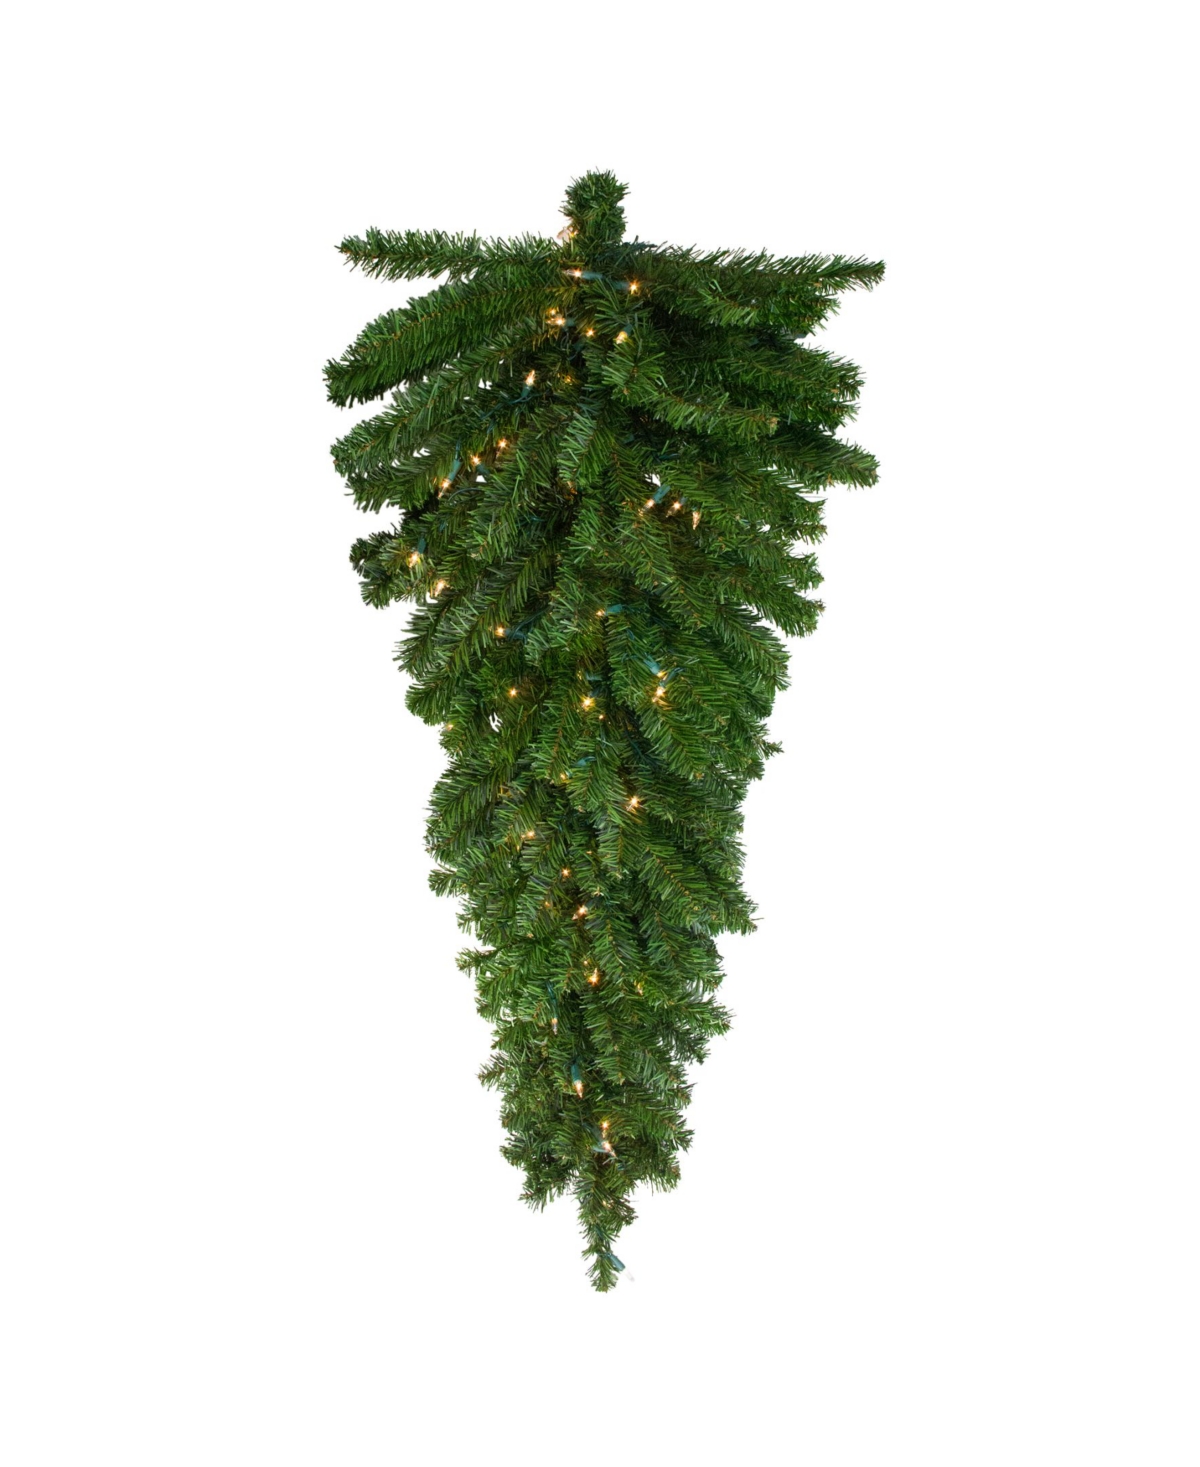 42" Pre-Lit Canadian Pine Artificial Christmas Teardrop Swag - Clear Lights - Green